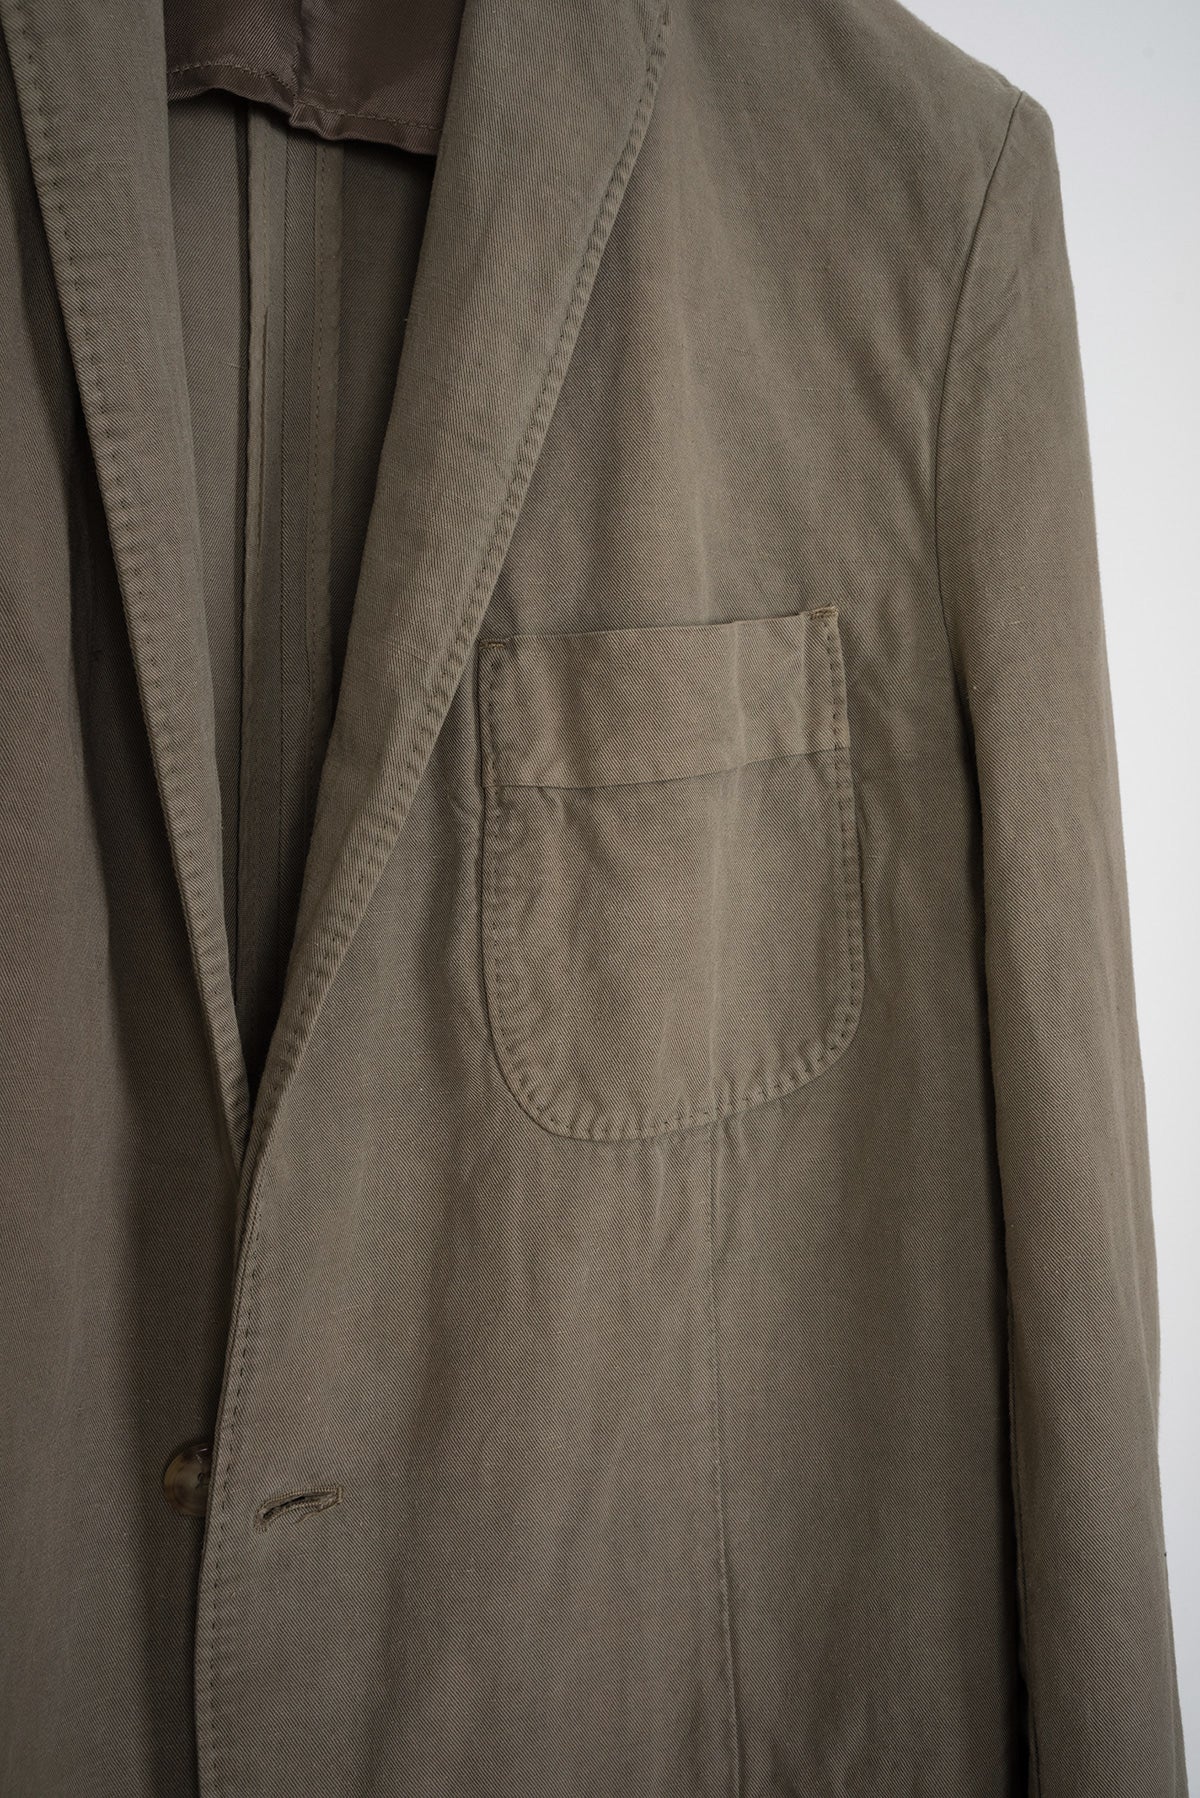 2004 S/S PATCH POCKET UNLINED RAYON/LINEN MILITARY GREEN BLAZER